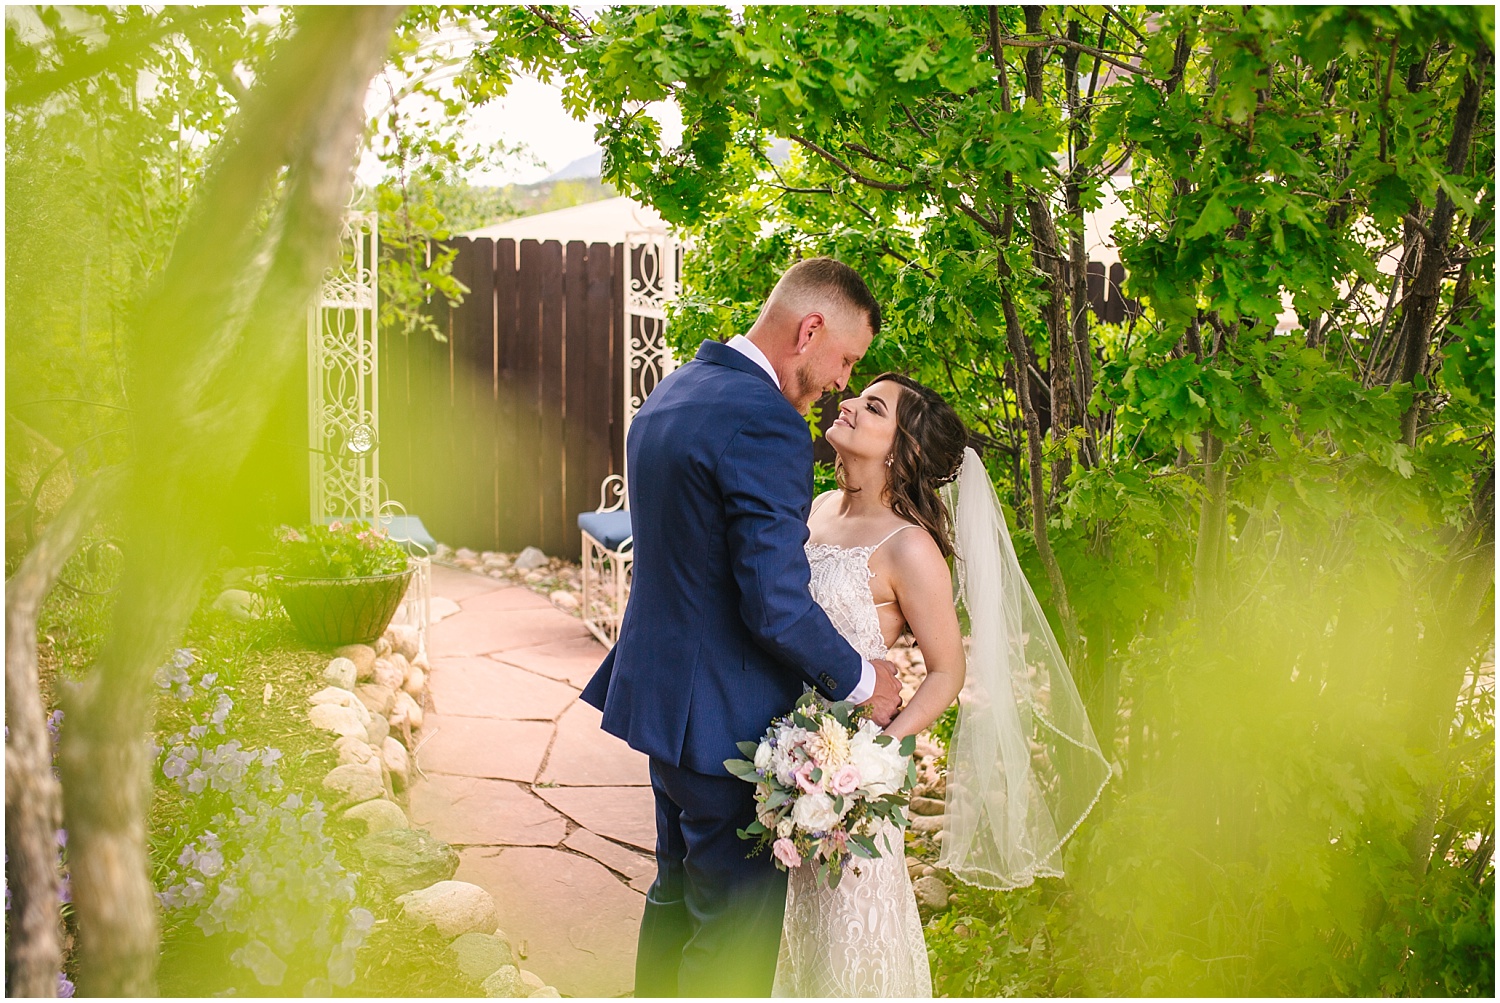 Bride and groom in the garden at Craftwood Inn wedding venue